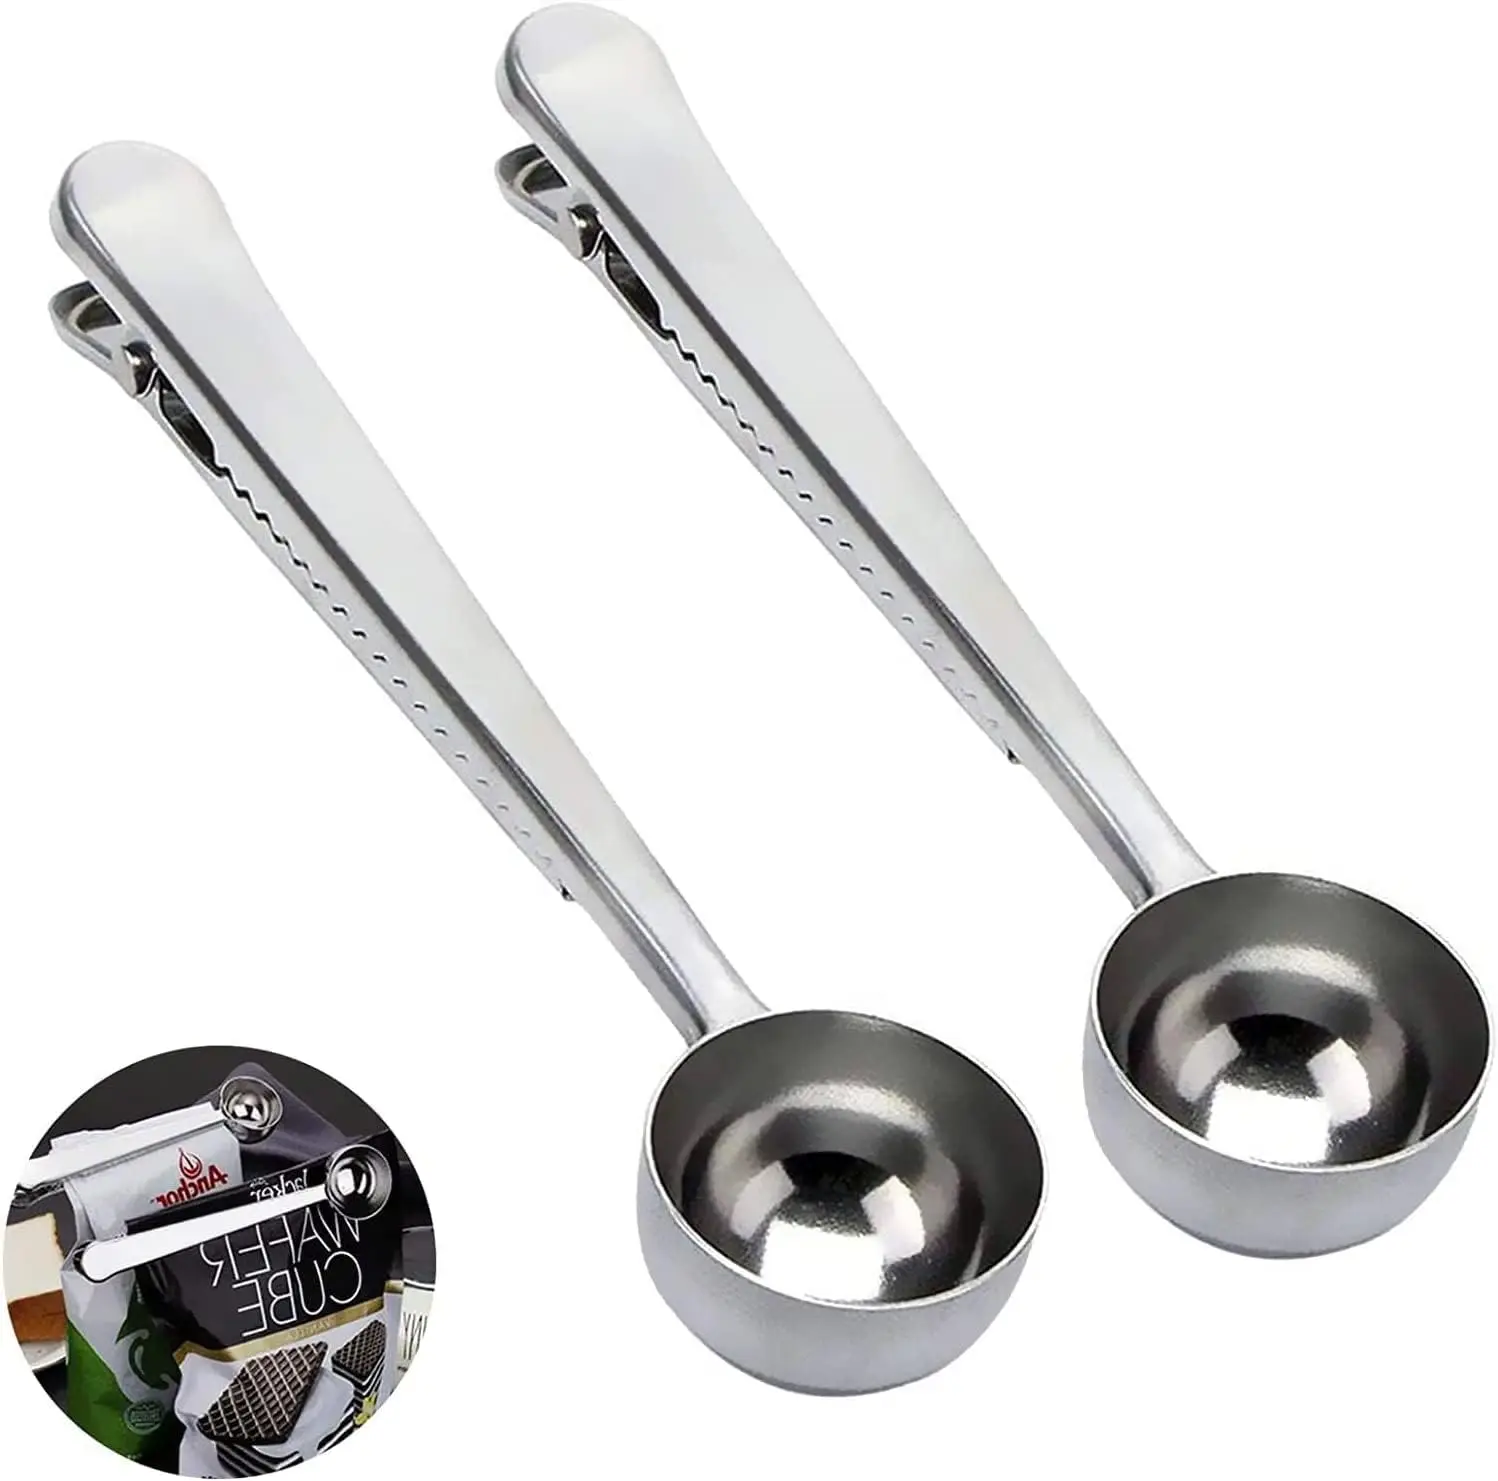 

2PCS Coffee Scoop Clip Stainless Steel Tablespoon Coffee Spoon With long handle Multifunction Sealing Bag Clip For Tea, Coffee